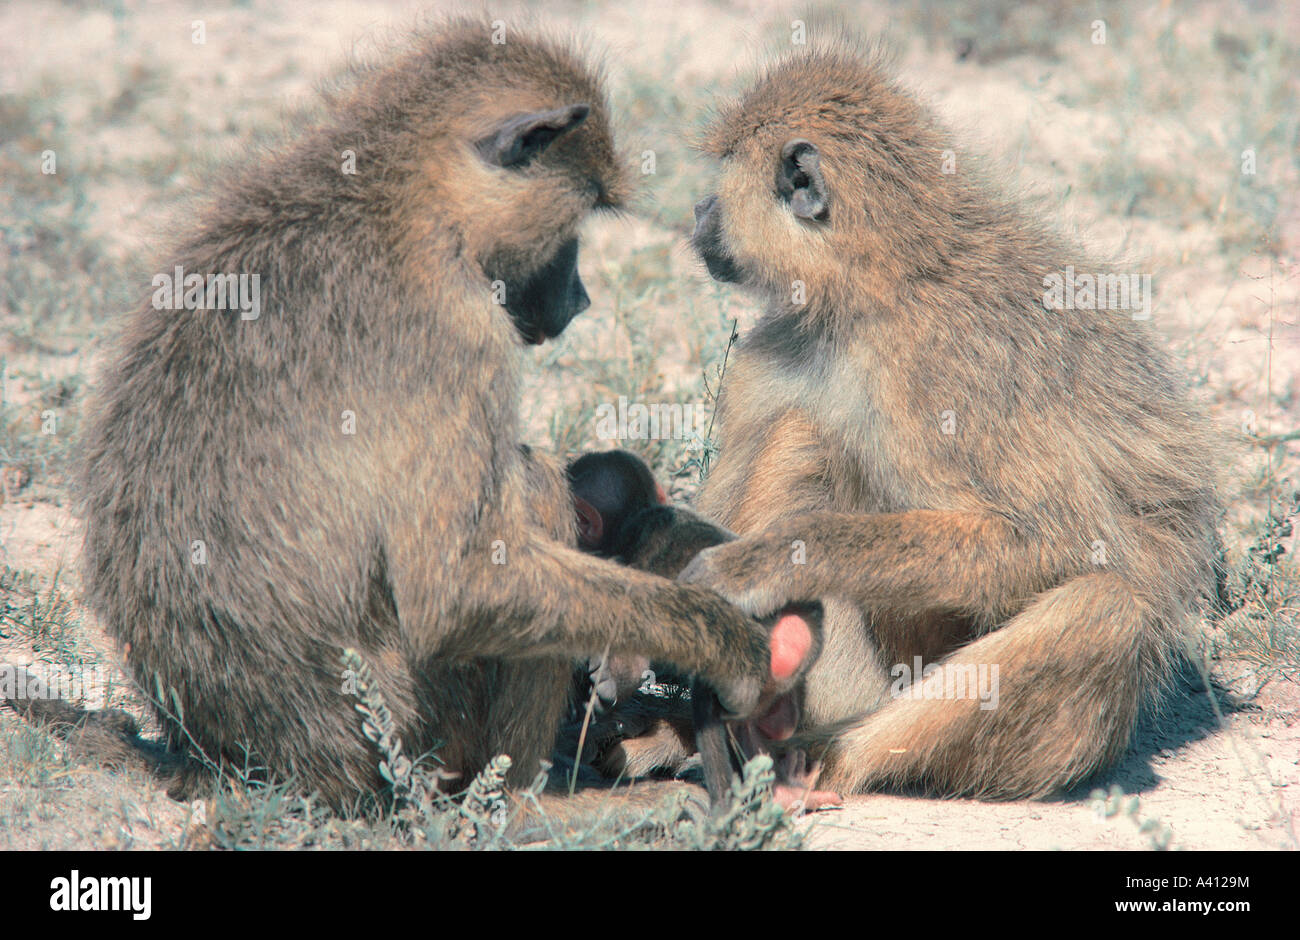 A tender scene with two adult Yellow Baboons sharing a baby Amboseli National Park Kenya East Africa Stock Photo